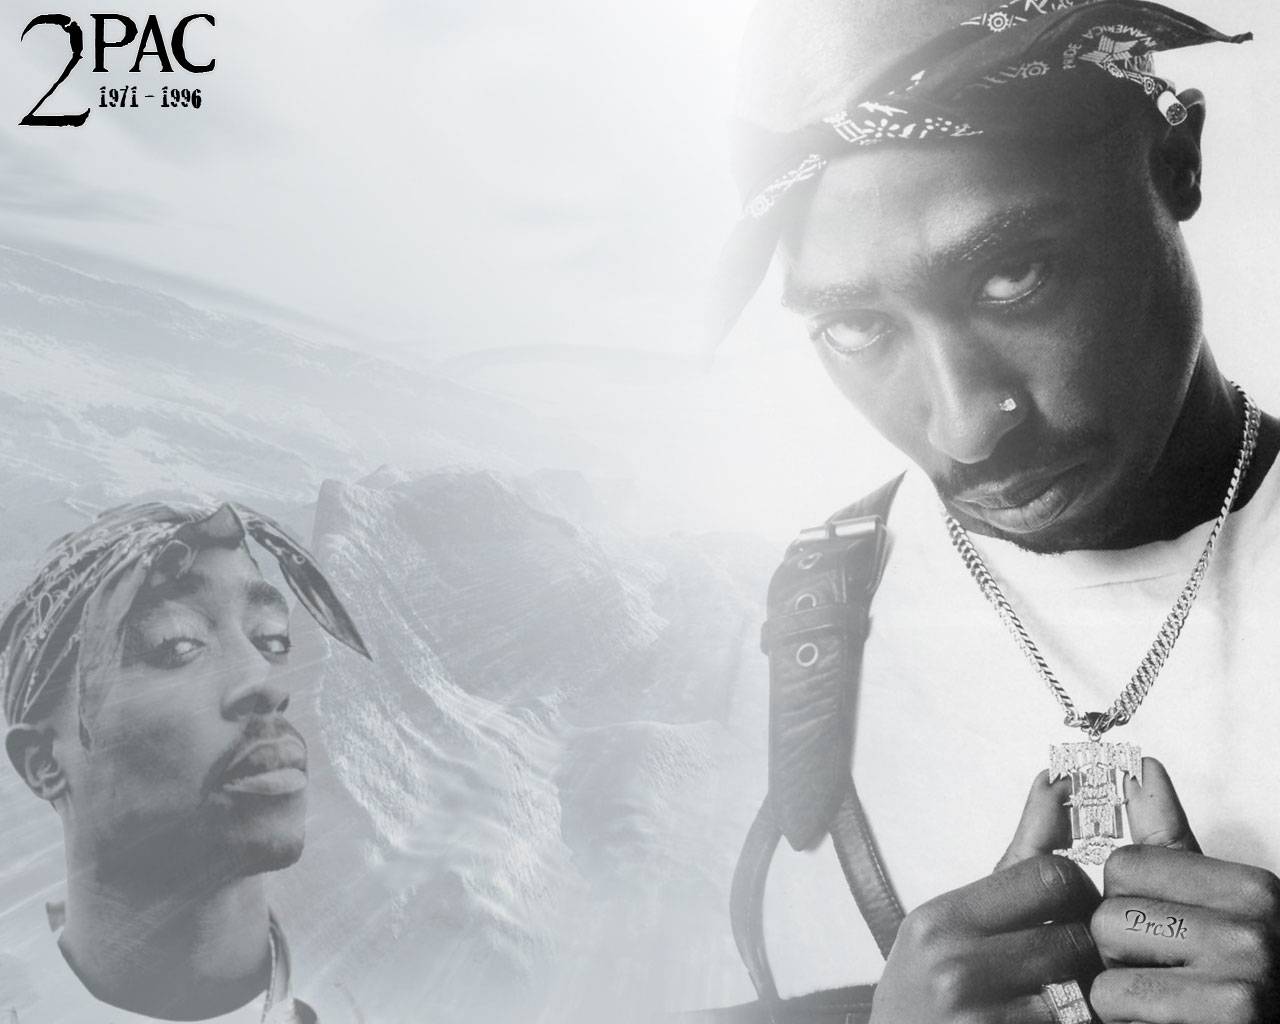 2Pac Shakur Until The End Of Time Wallpaper   2pac Wallpaper